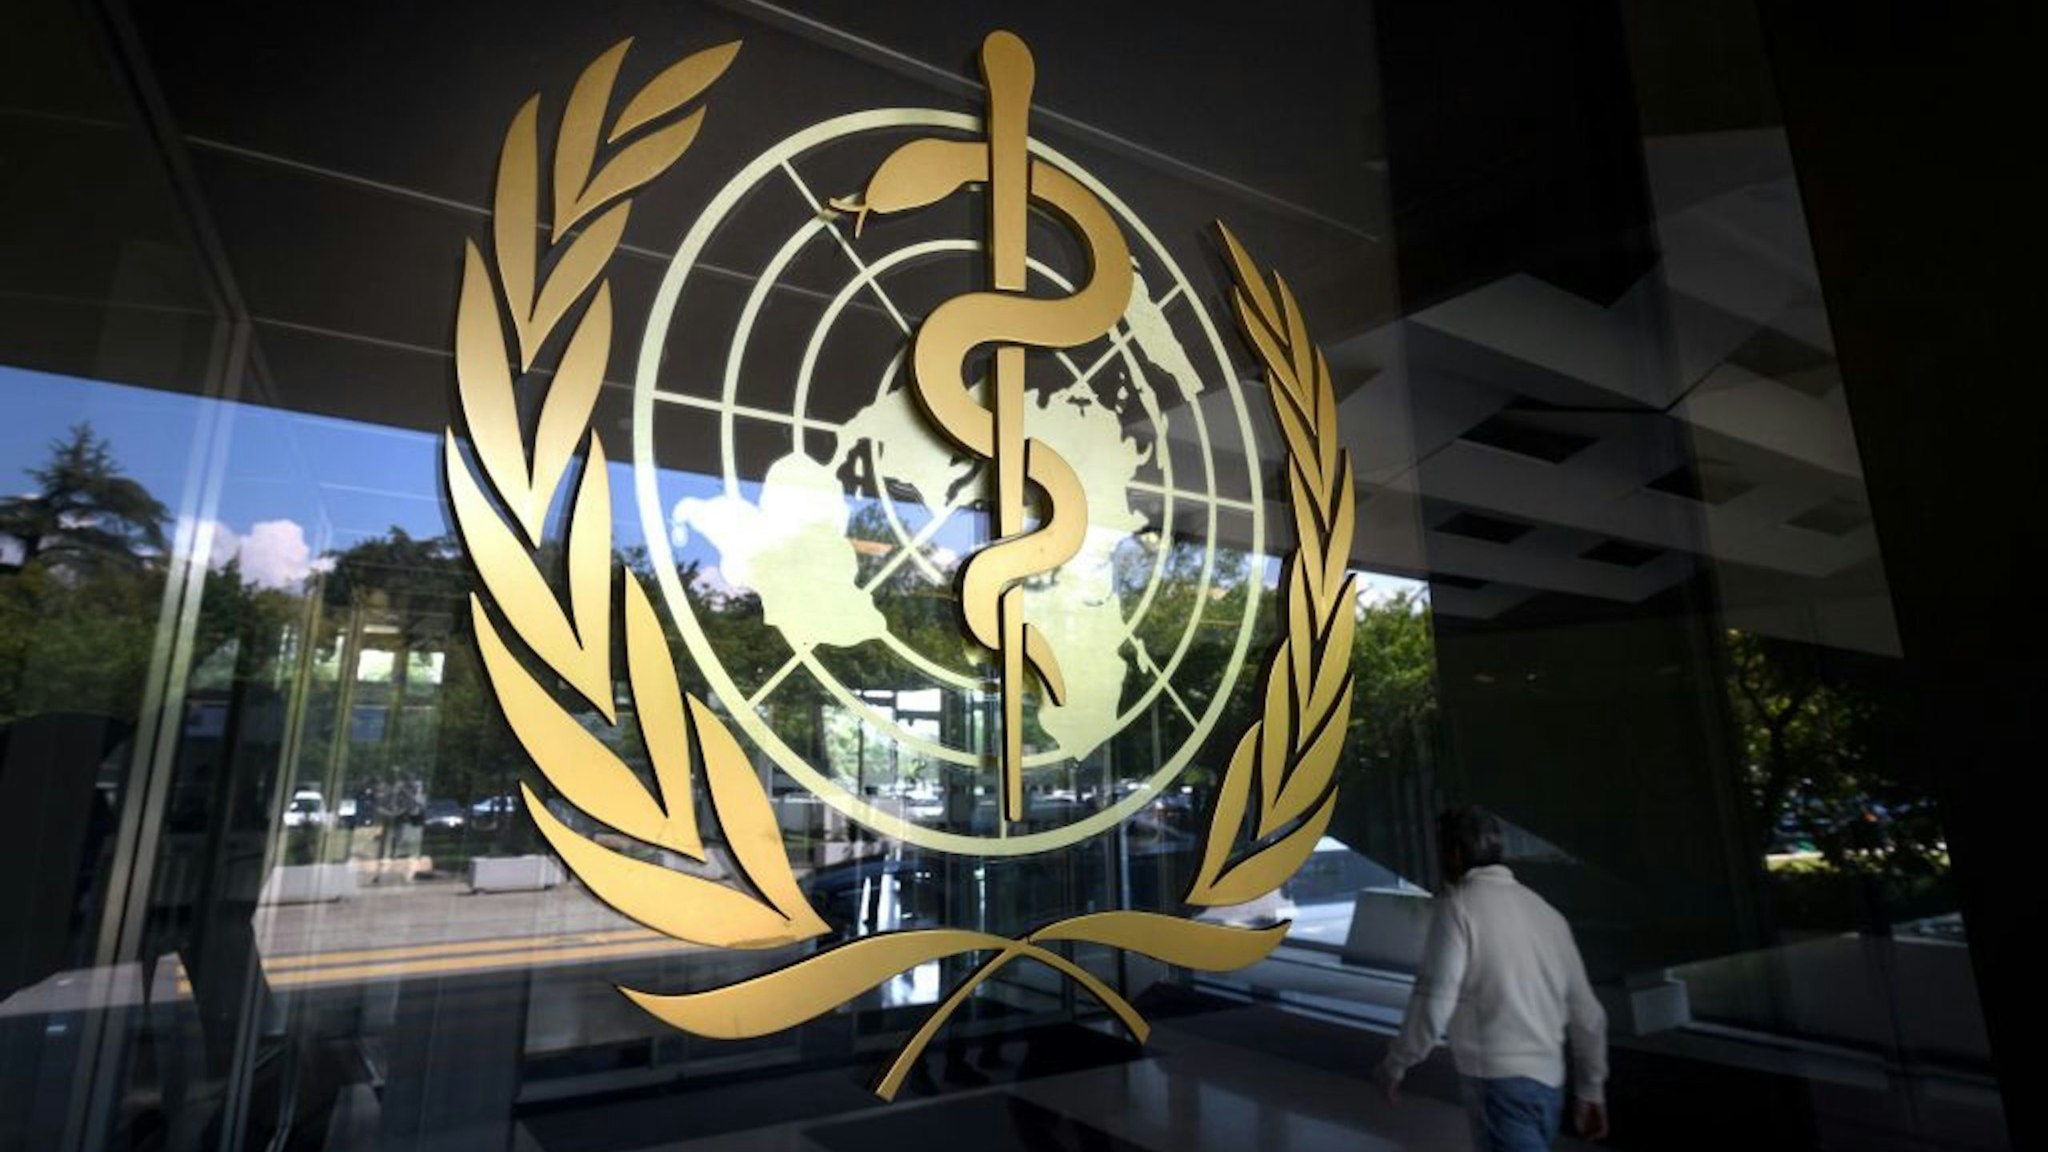 A sign of the World Health Organization (WHO) is seen at the entrance of the UN specialised agency's headquarters on May 18, 2018 in Geneva. - An Ebola outbreak in the Democratic Republic of the Congo has a high risk of spreading internally, the World Health Organization warned ahead of a meeting on whether to declare it an event of international concern. (Photo by Fabrice COFFRINI / AFP)